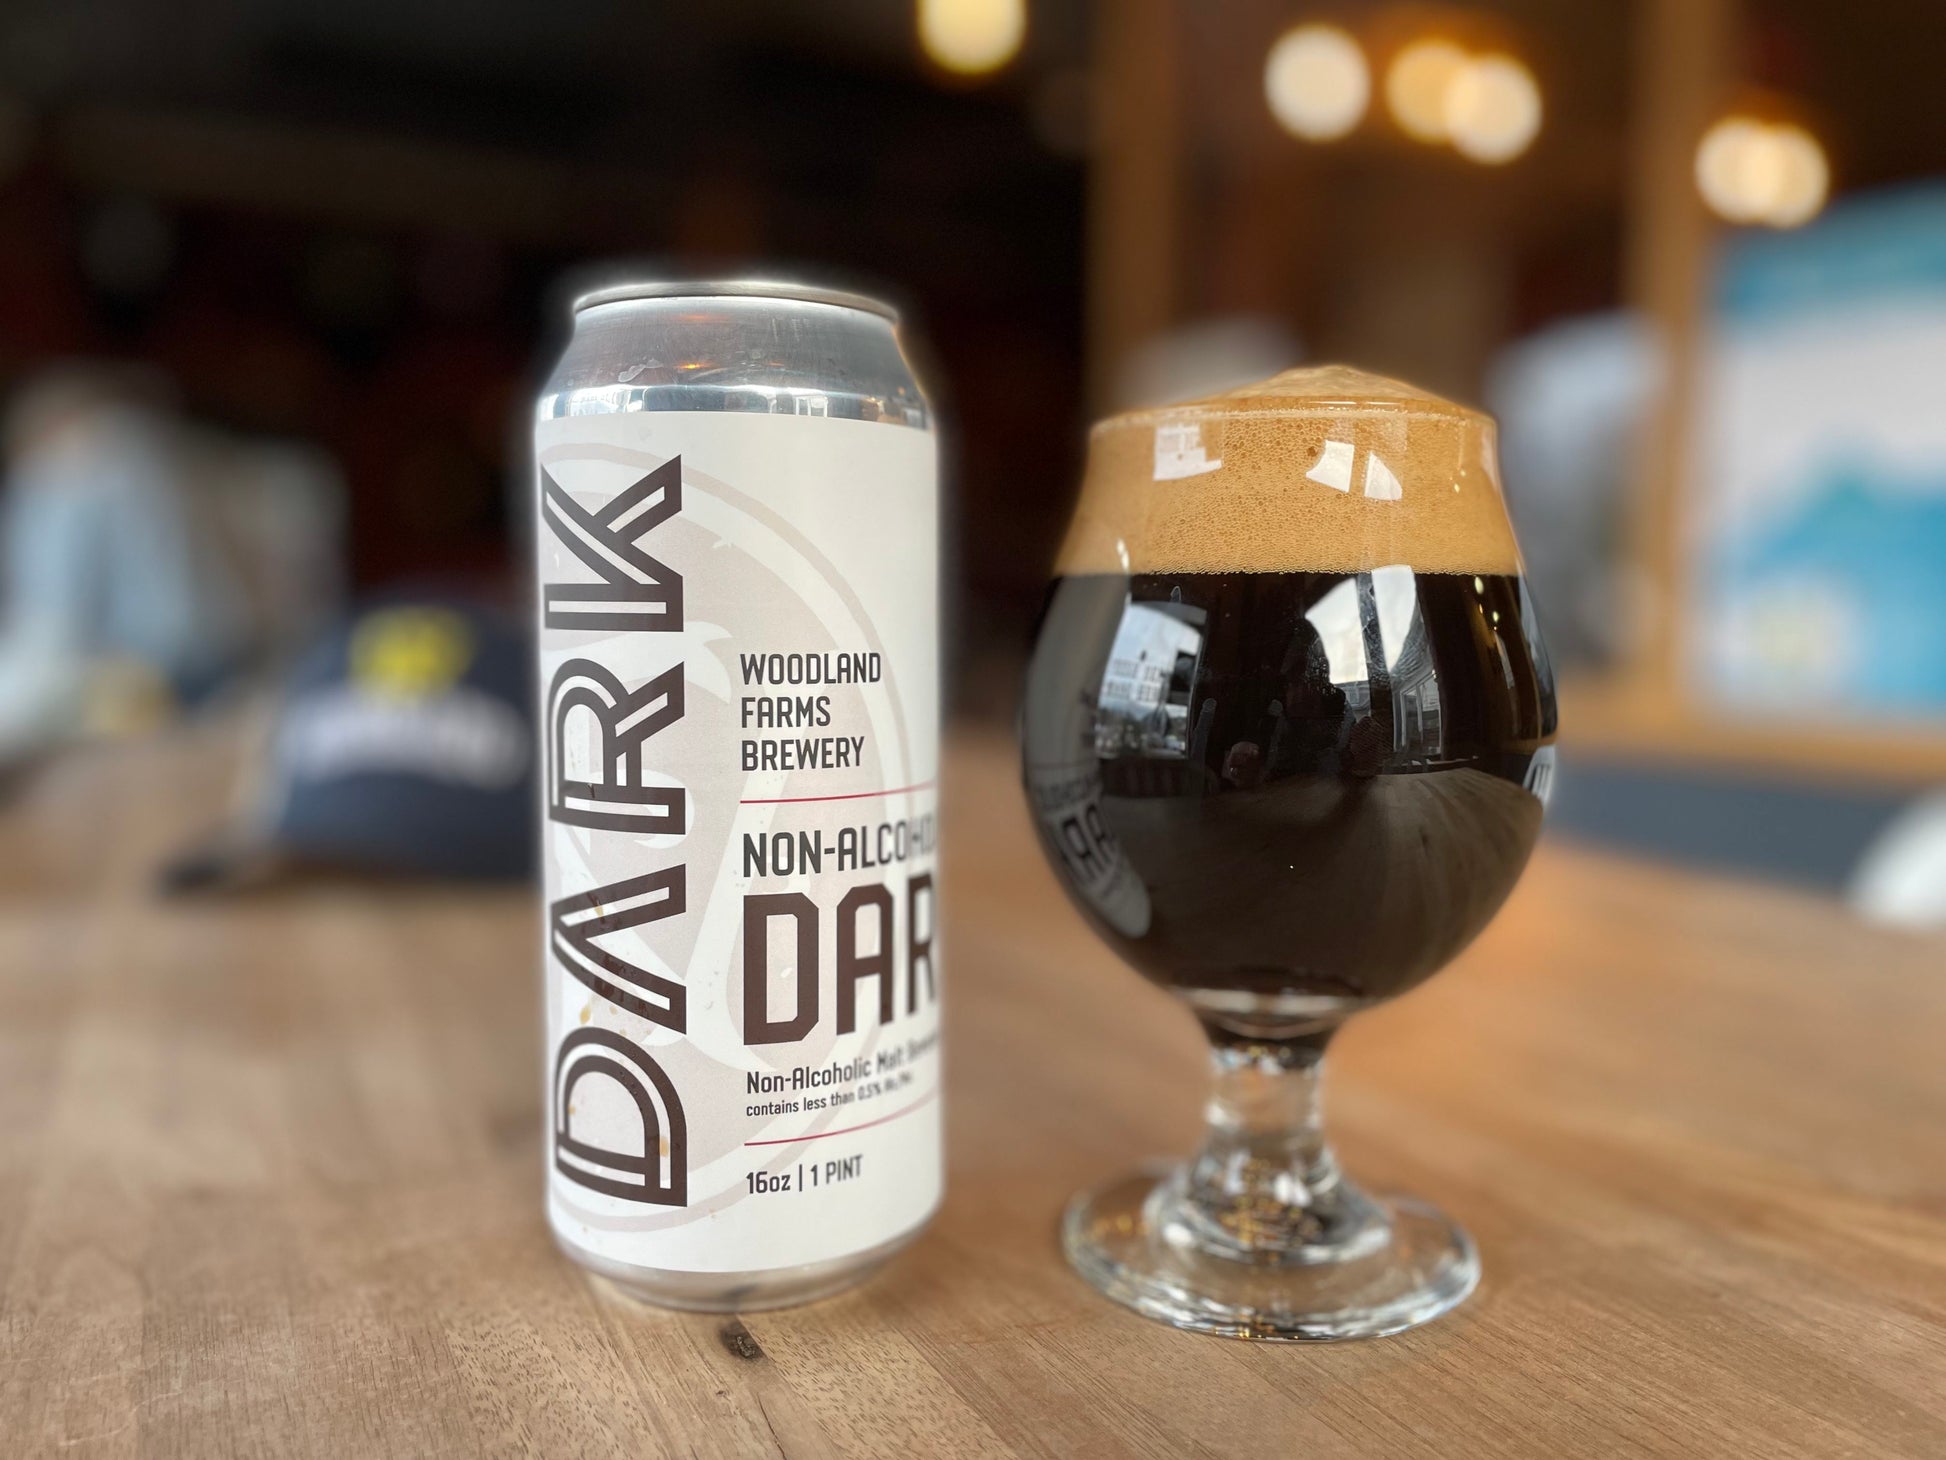 Dark - Non Alcoholic Stout, 4 pack - Woodland Farms Brewery LLC